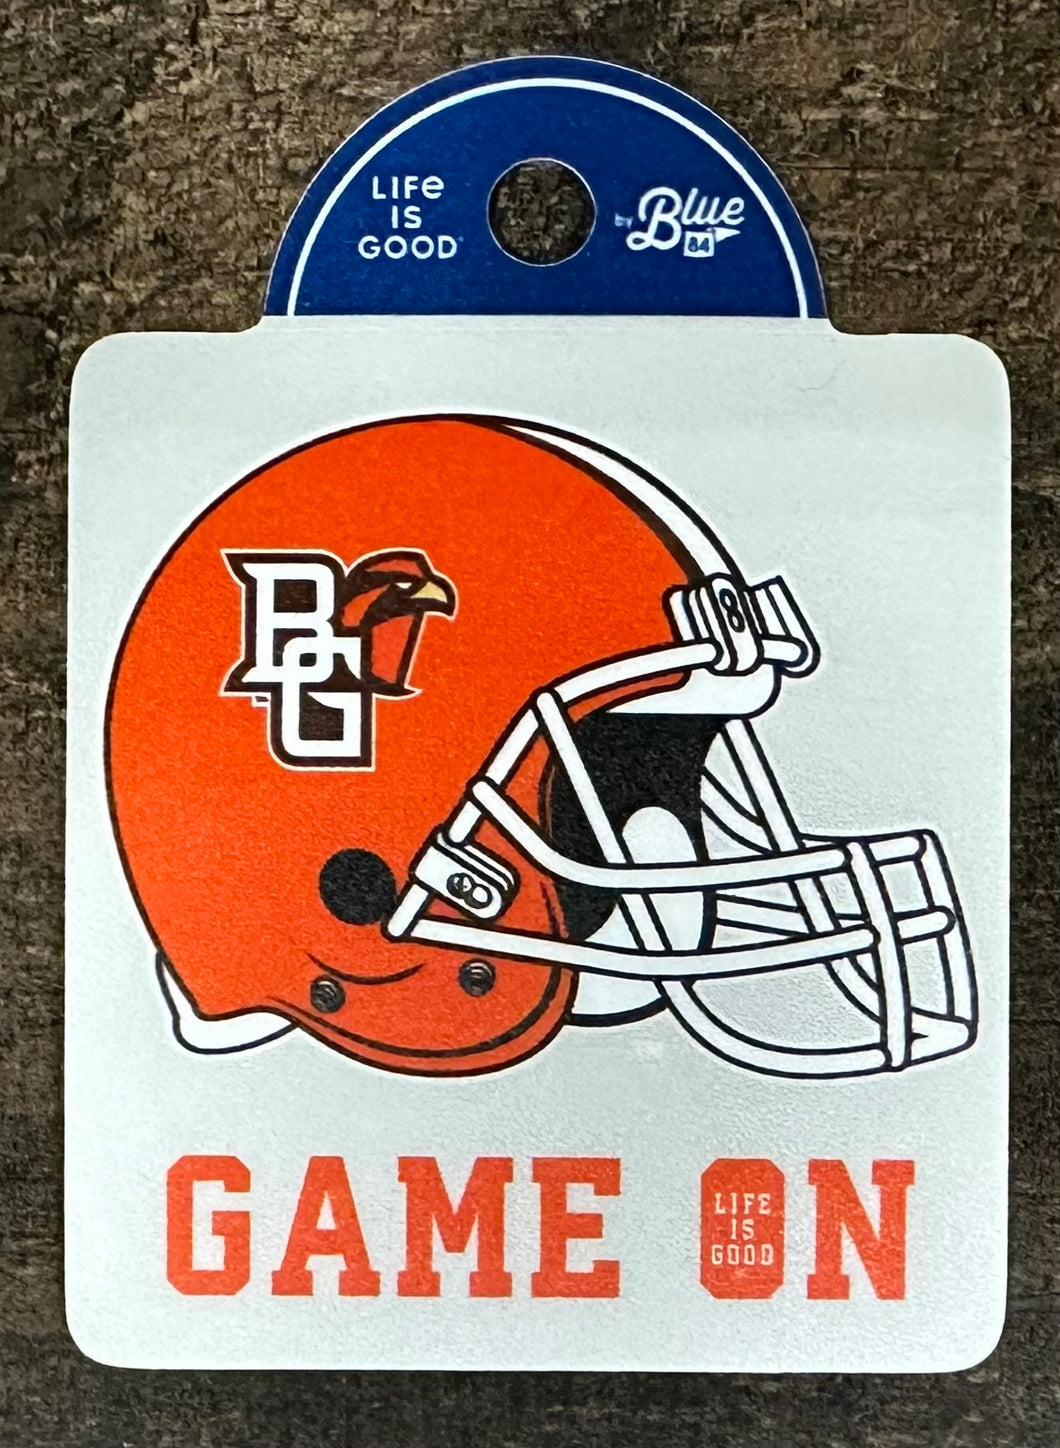 Blue 84 LIG Game On Football Small Sticker